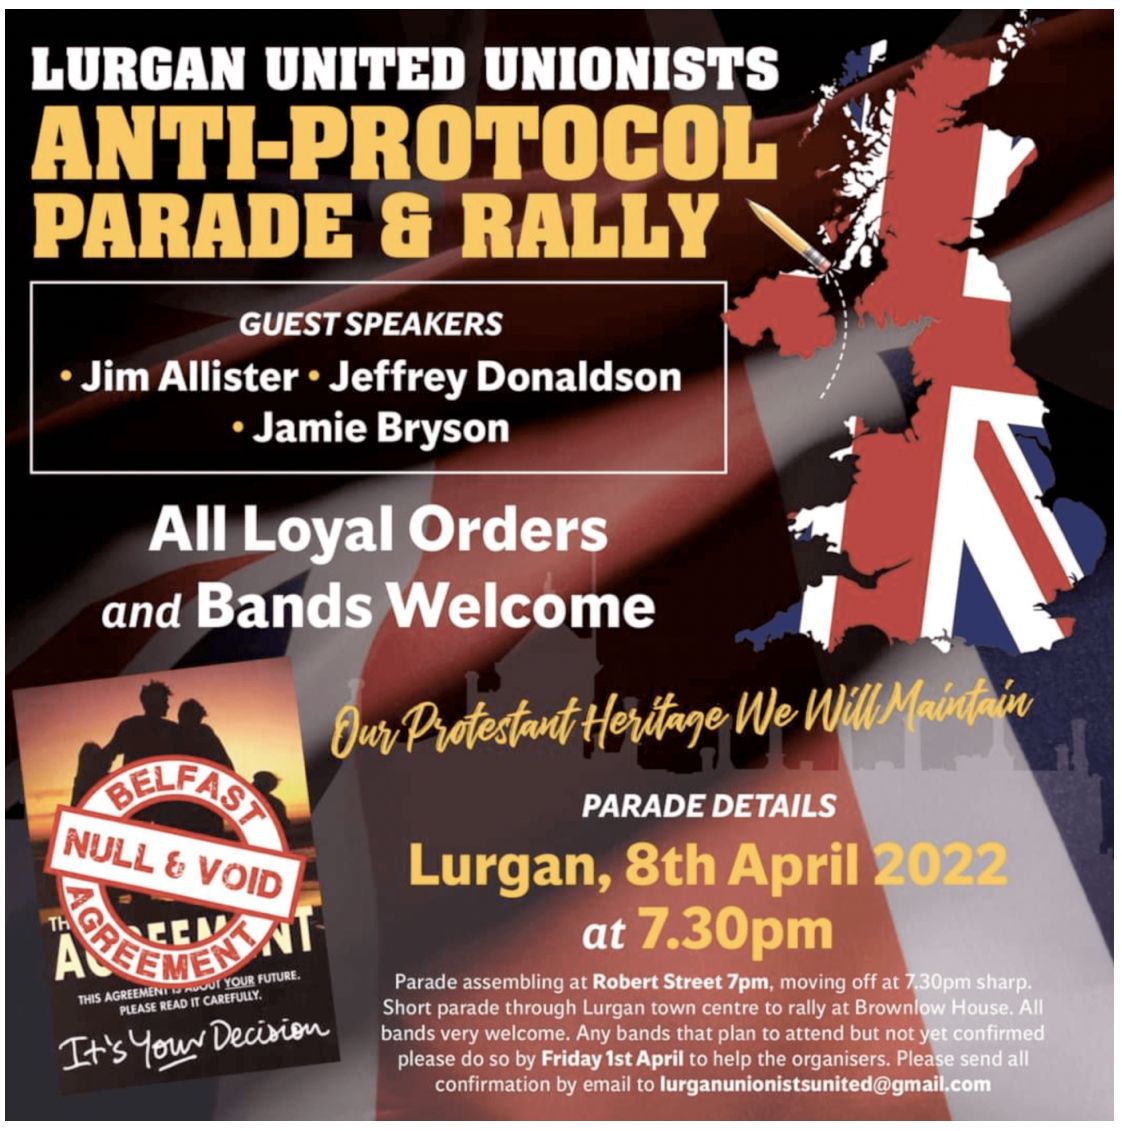 LOOKING BACK: Events like the controversial Lurgan Protocol rally express unionist political nihilism